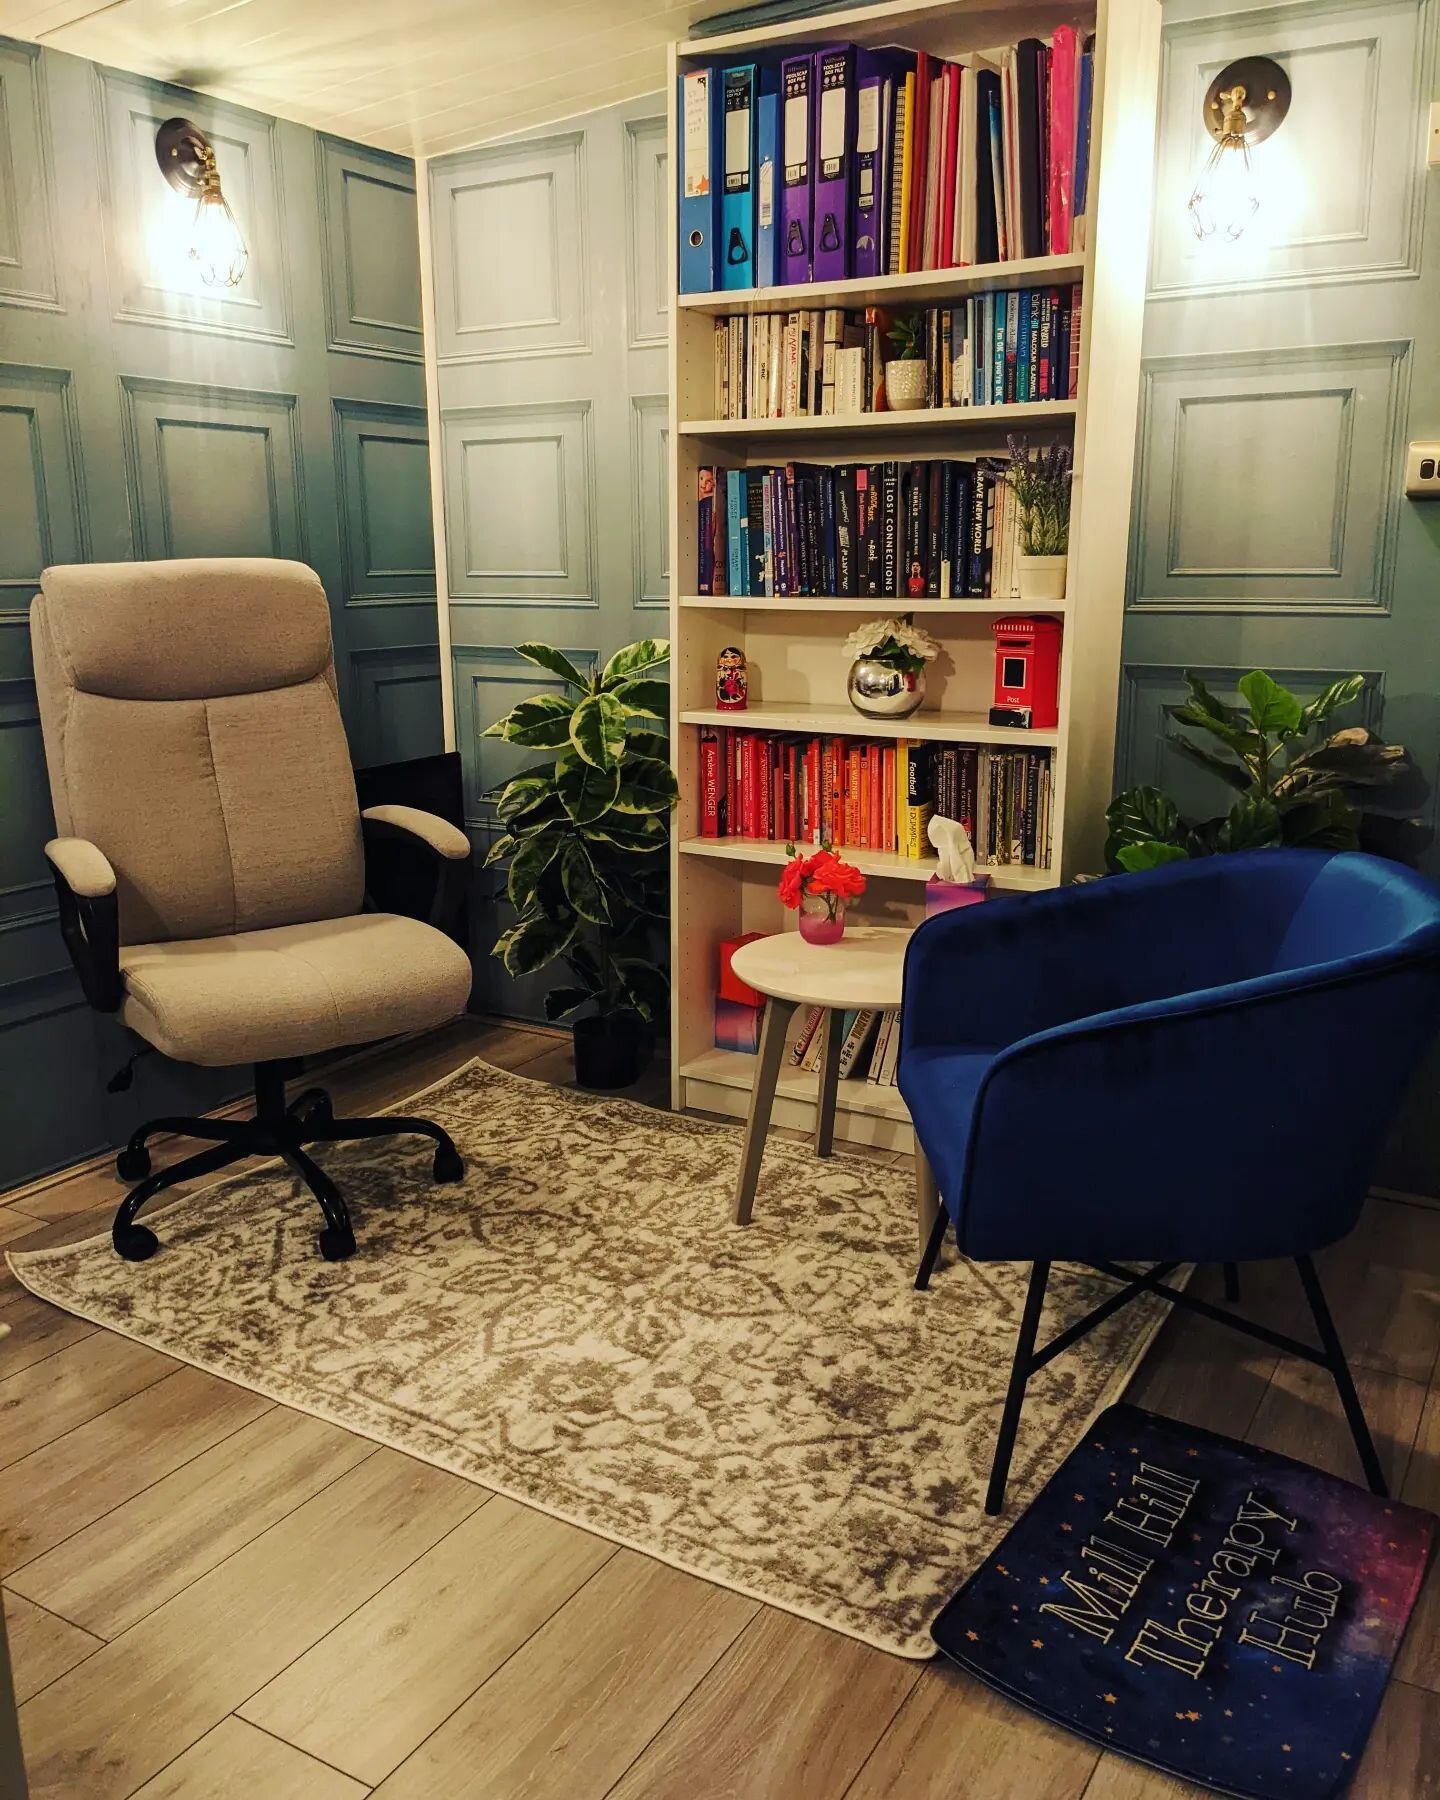 Our new adult therapy space is ready and I am in love with the results! At the #MillHillTherapyHub and we are so thrilled to show you! Rentals start at &pound;13 per hour and we have clients to send your way! 💺💺

#NW7 #MillHill #TherapySpace #Londo